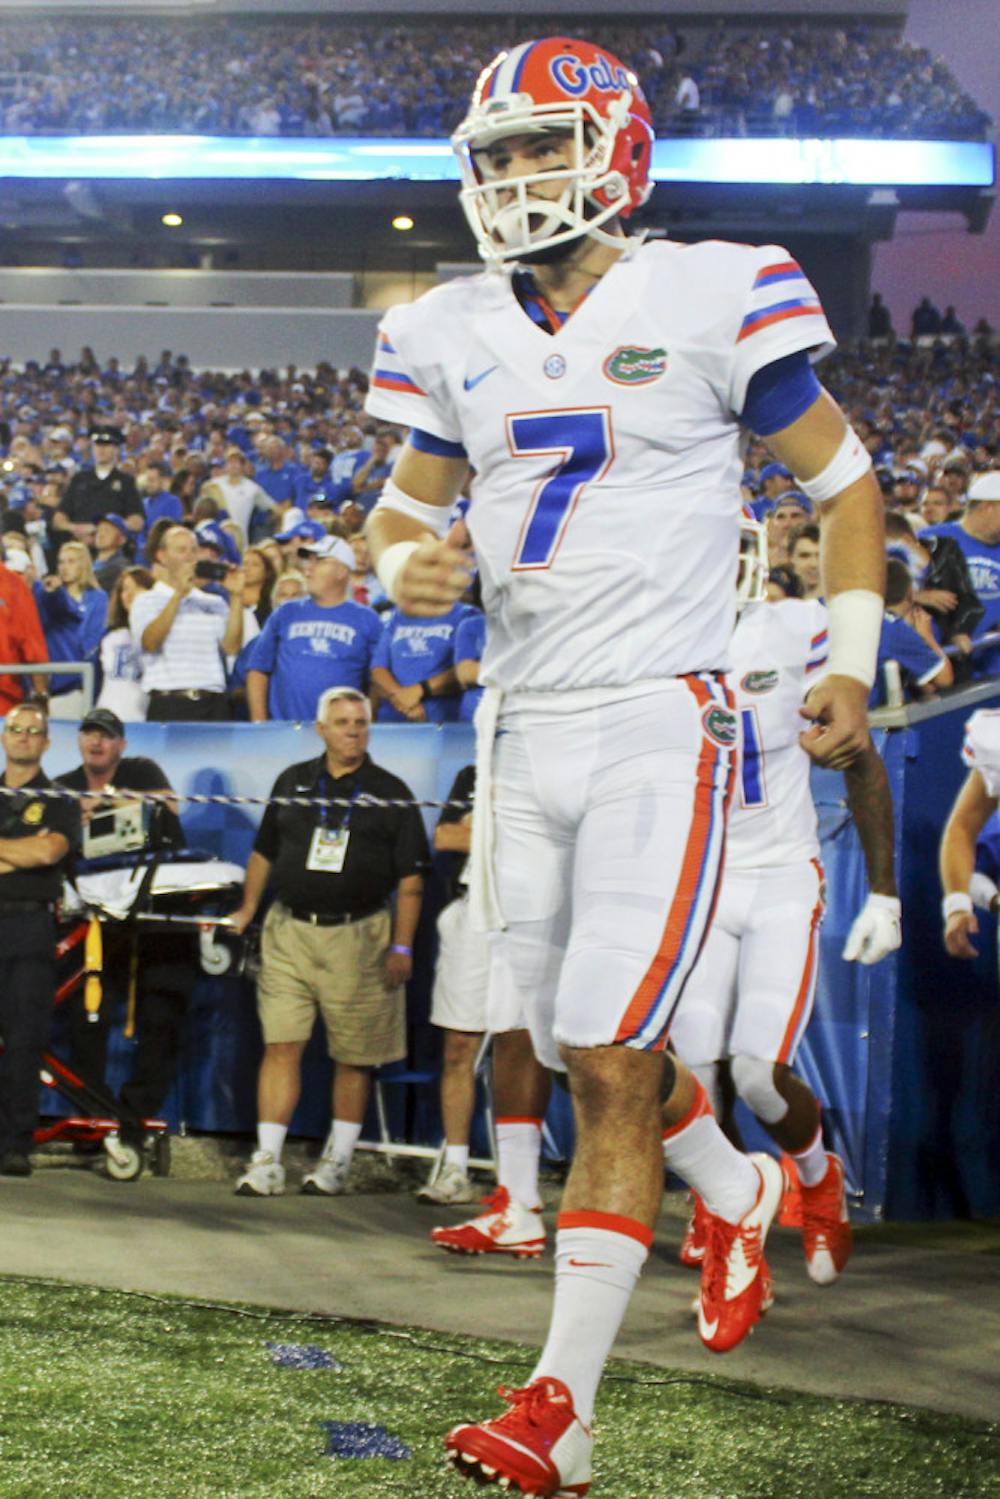 <p>Will Grier runs onto the field during Florida's 14-9 win against Kentucky on Sept. 19 at Commonwealth Stadium in Lexington, Kentucky. West Virginia announced on April 6, 2016, that Grier was transferring to WVU. </p>